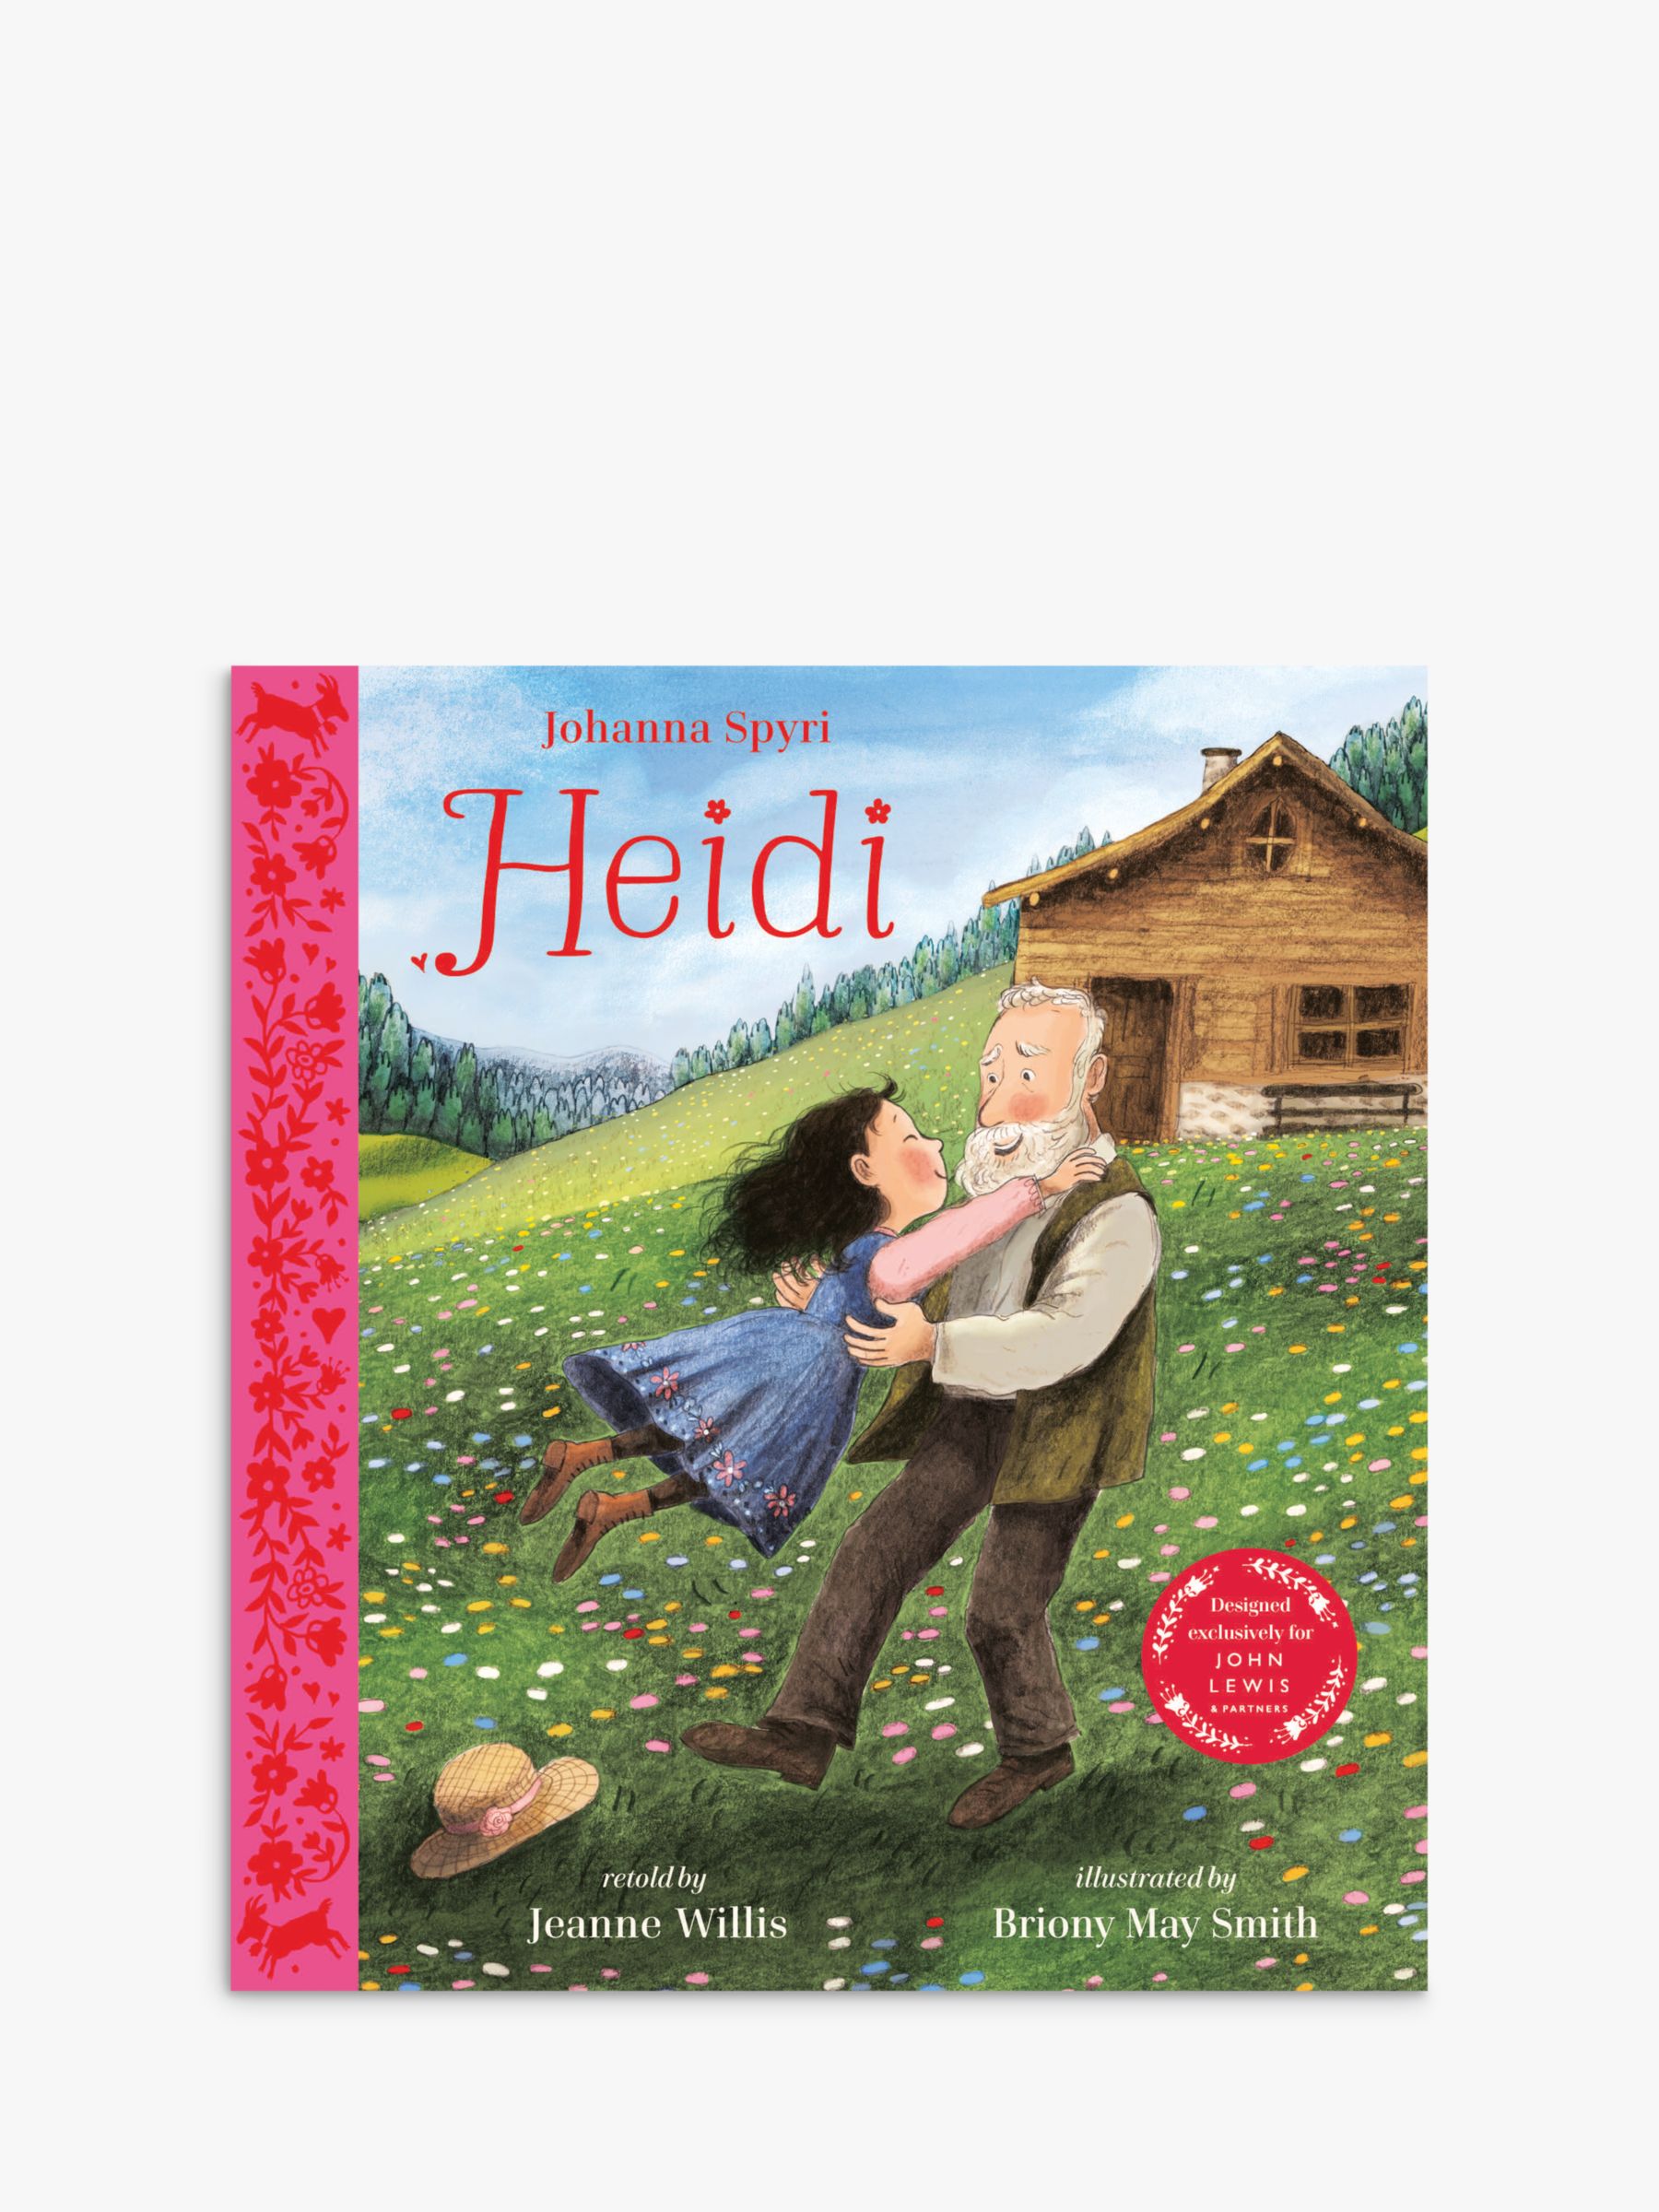 book review on heidi